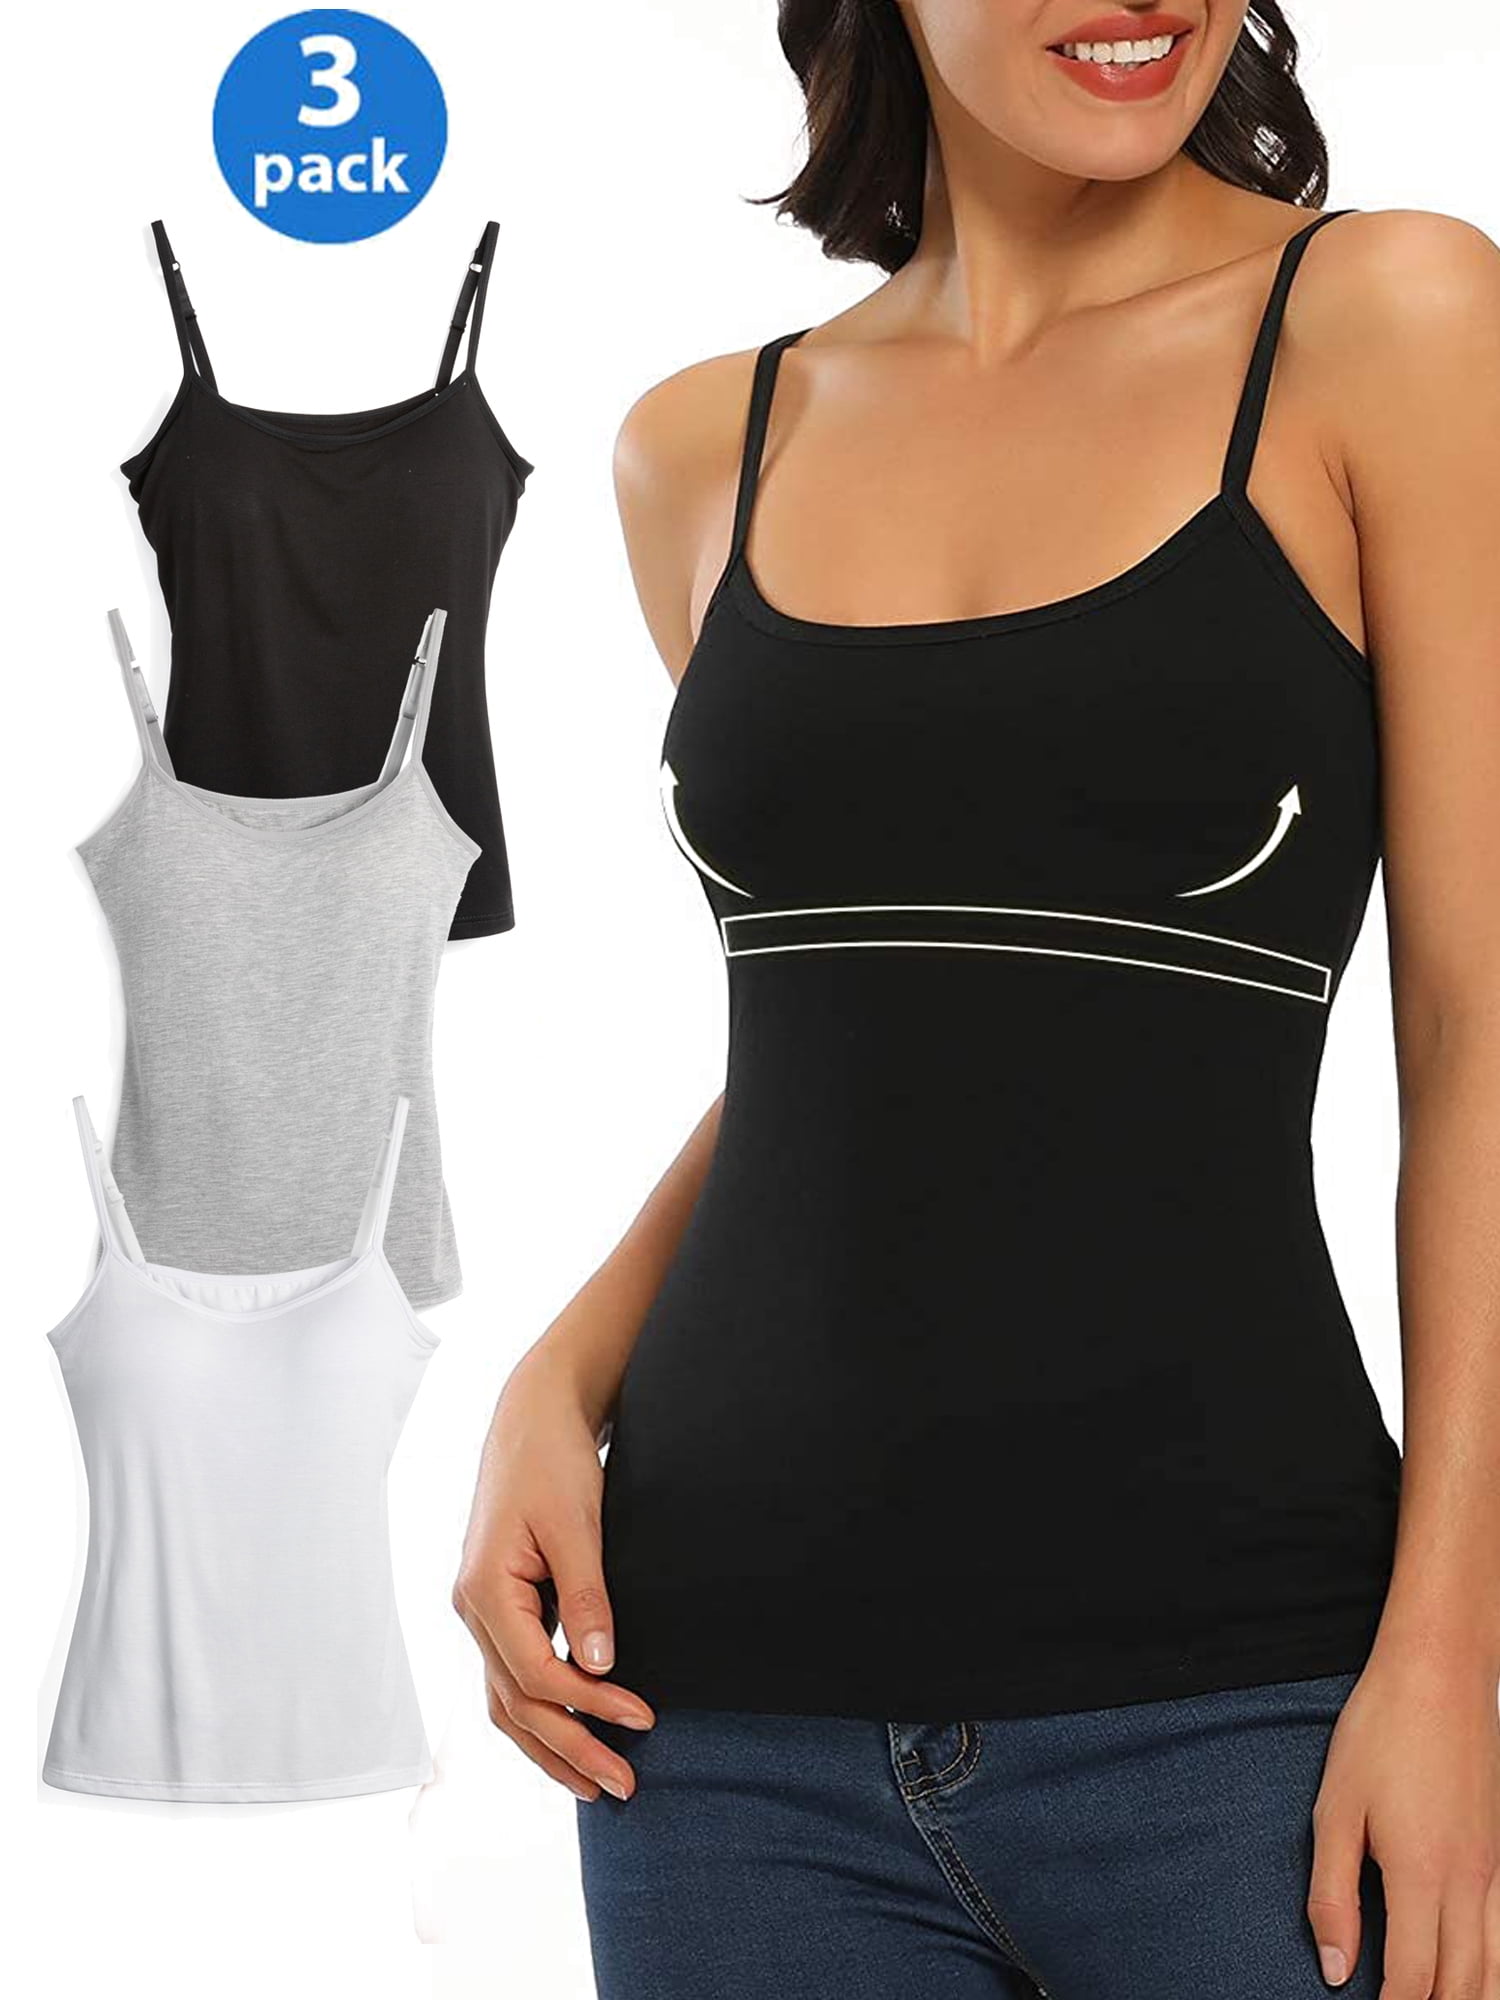 Summer Sleeveless Padded Shirt Women Camisoles Tops with Built In Bra  Spaghetti Strap Basic Tank Top – the best products in the Joom Geek online  store